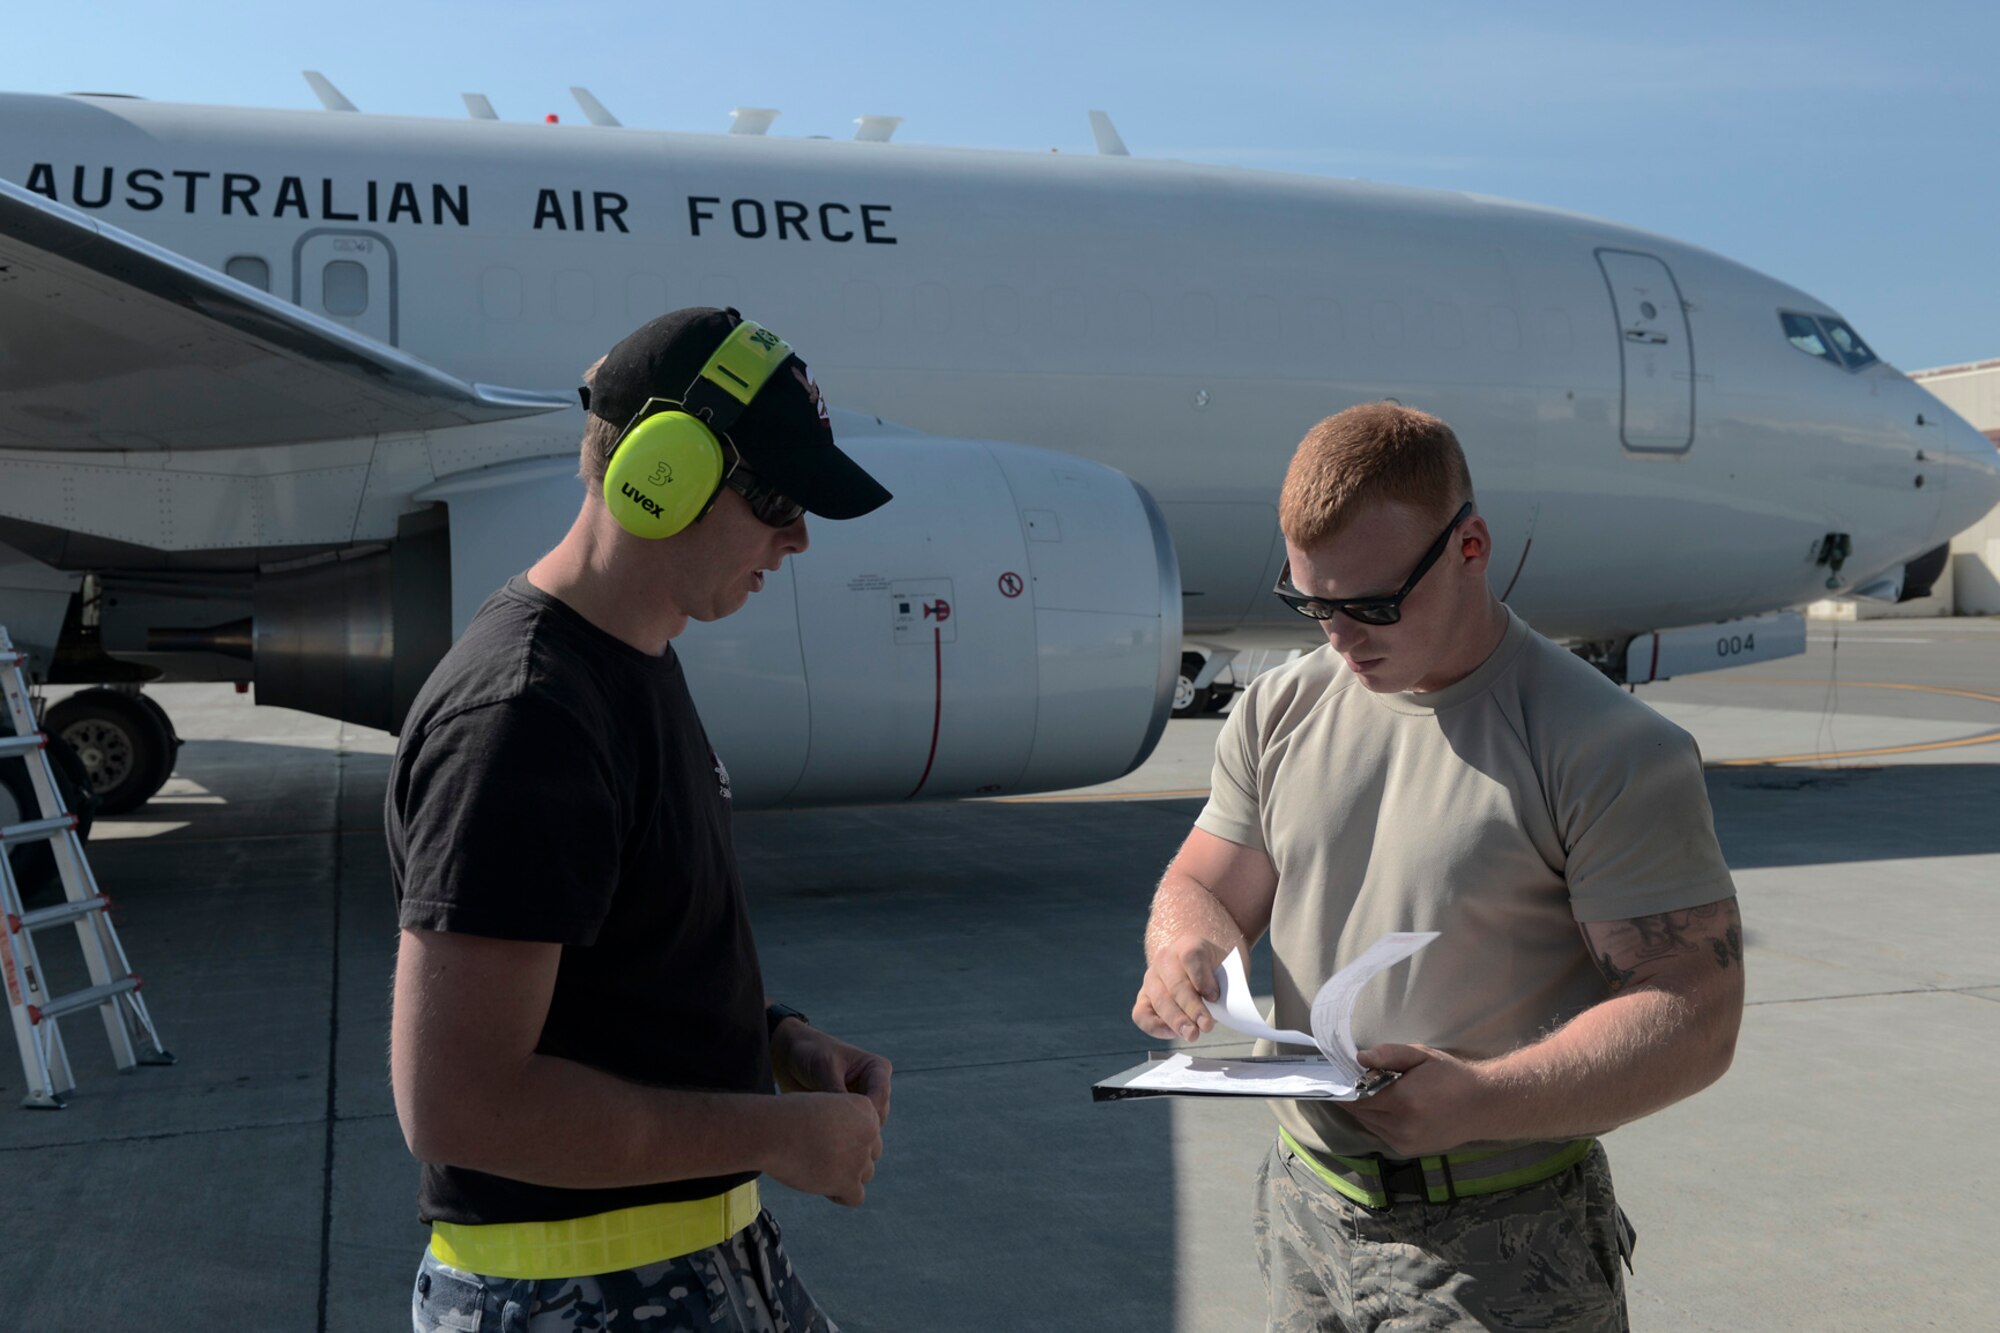 (Right) U.S. Air Force Senior Airman Reinhardt Andersen completes a fuels work order with Kayne Markham, Royal Australian Air Force leading aircraftsman with the 42 Wing, 2 Squadron, during RED FLAG-Alaska at Joint Base Elmendorf-Richardson, Alaska, Aug. 14, 2015. Andersen is with the 18th Logistical Readiness Squadron out of Kadena Air Base, Japan. (U.S. Air Force photo by Staff Sgt. Cody H. Ramirez/Released)